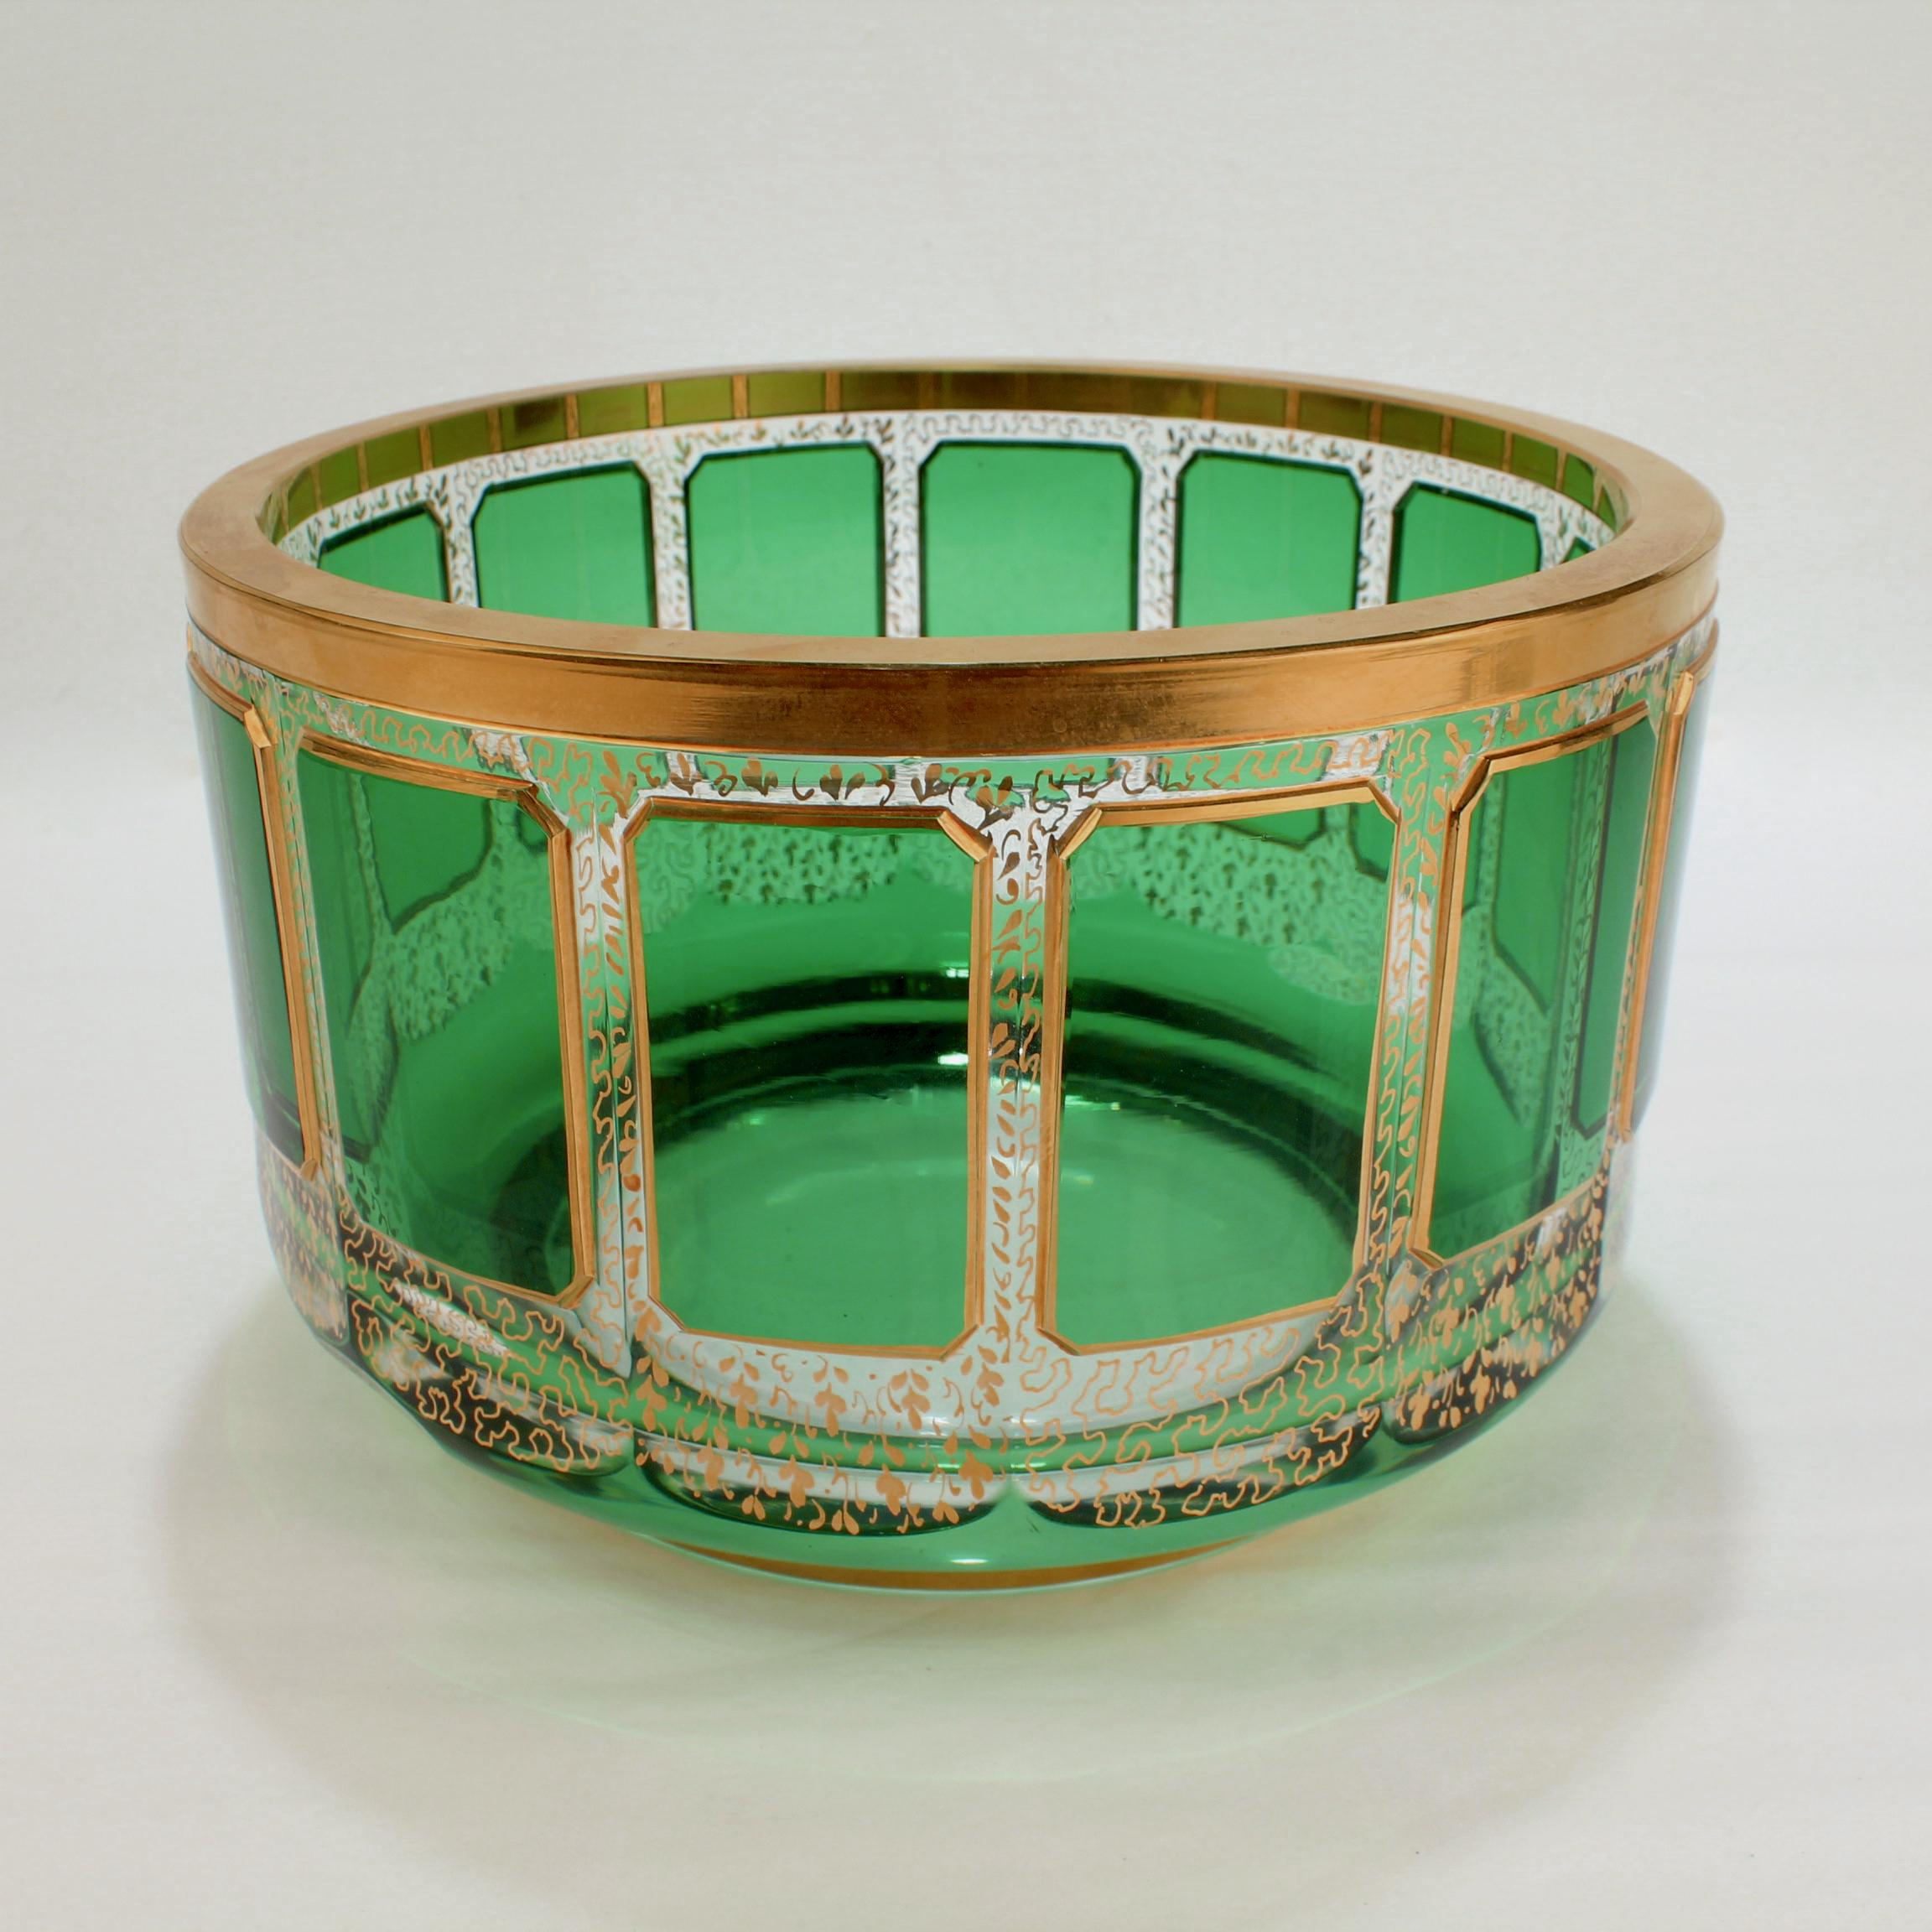 A fine vintage Bohemian art glass bowl.

With large green cabochons around its circumference and rich gilt decoration.

Attributed to Moser. 

Simply a wonderful glass bowl!

Date:
20th Century

Overall Condition:
It is in overall good,